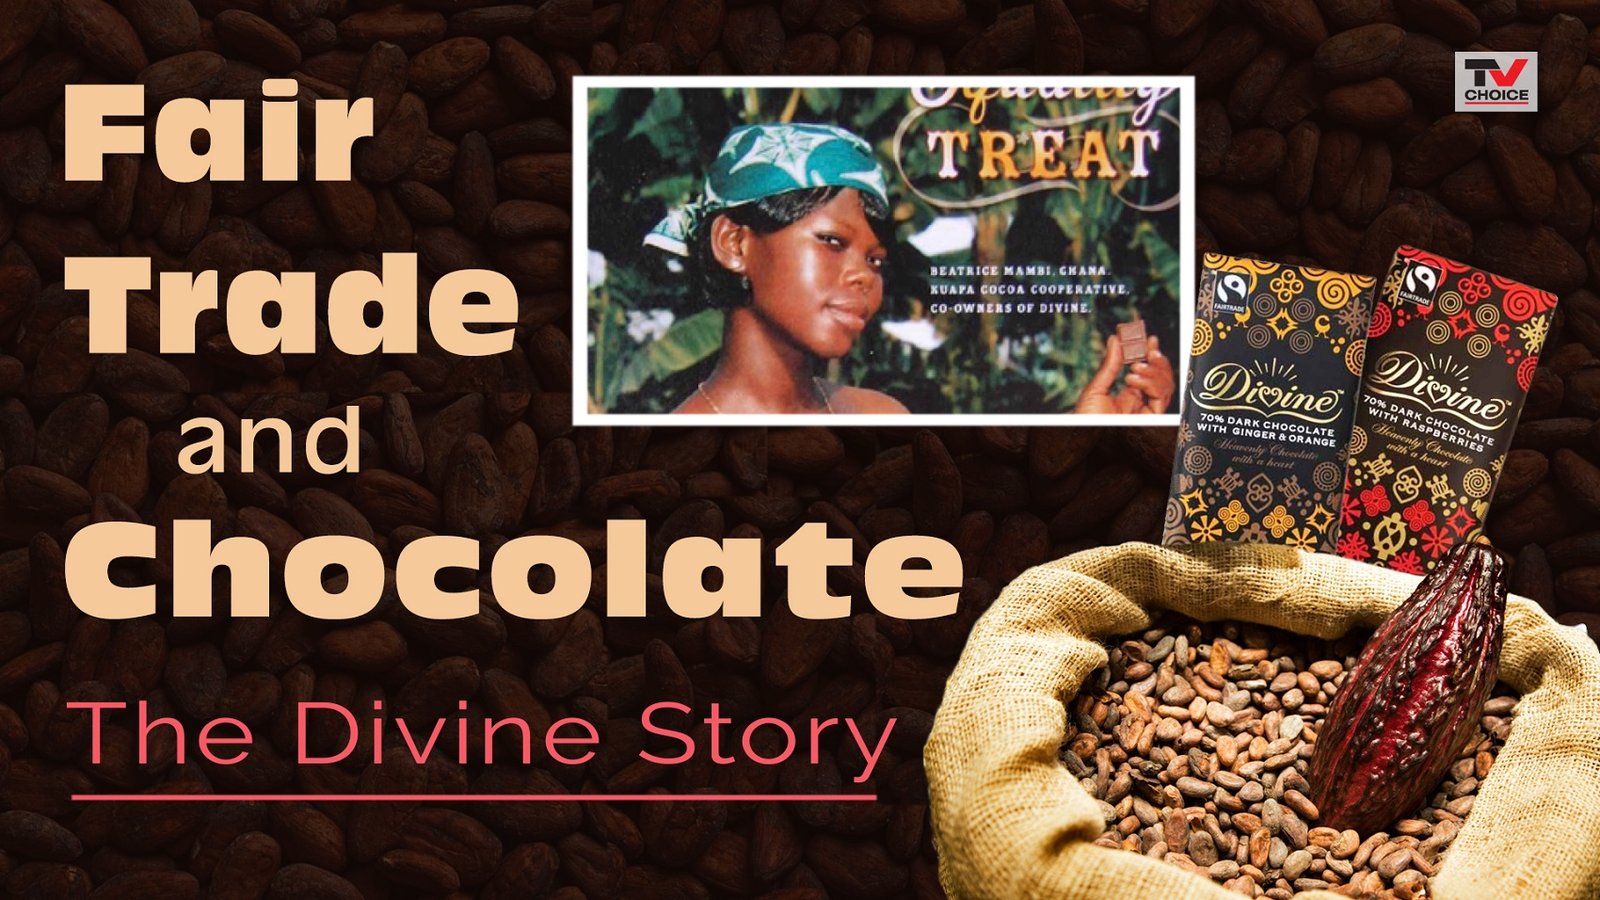 Fair Trade and Chocolate: The Divine Story